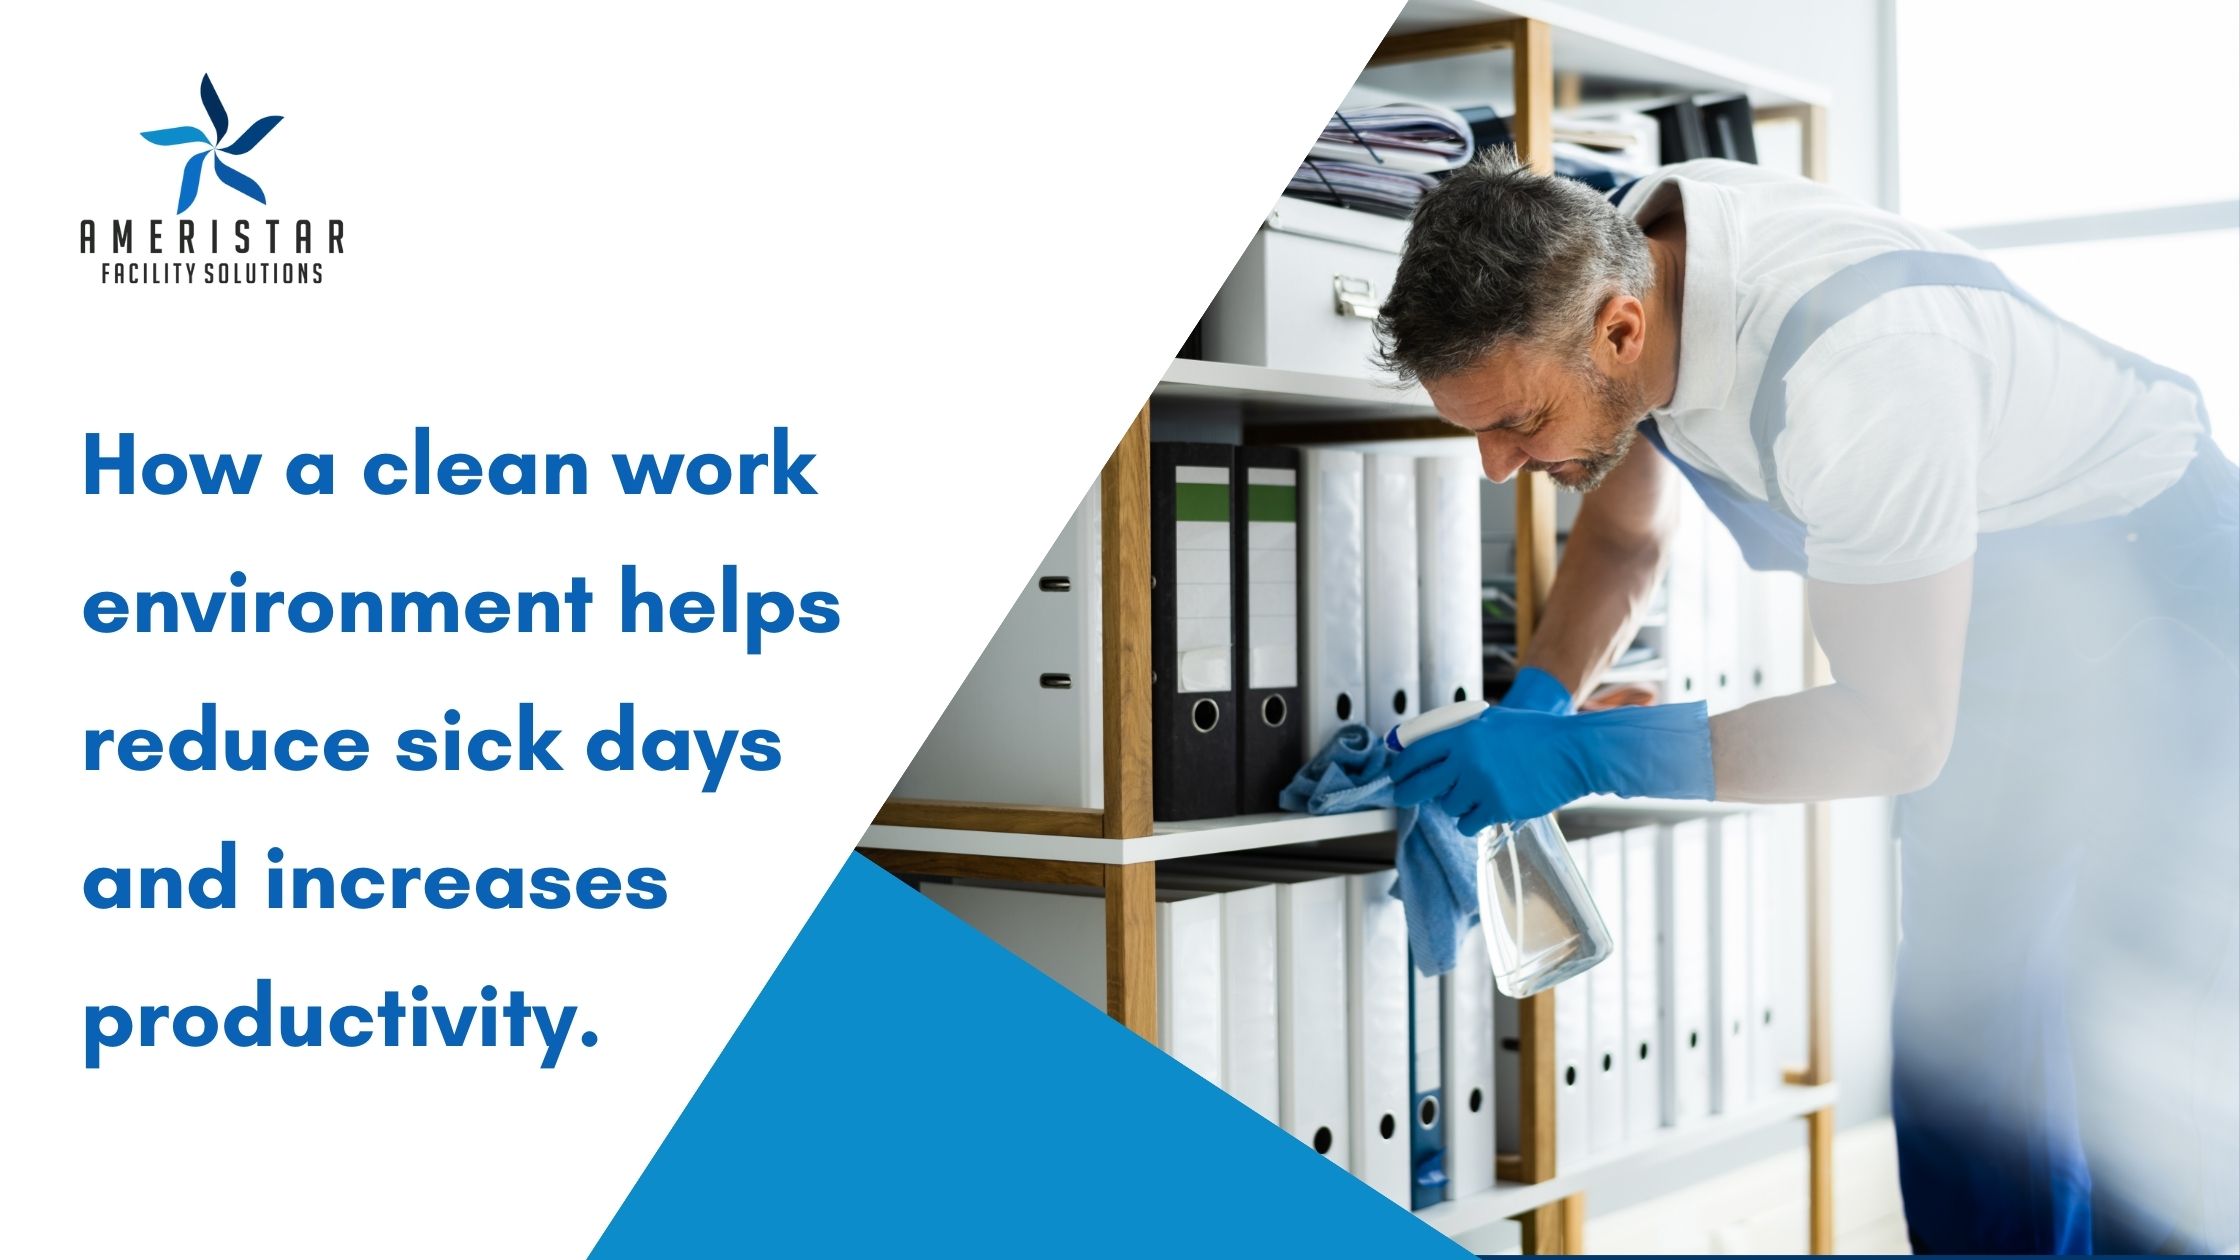 How A Clean Work Environment Helps Reduce Sick Days and Increases Productivity